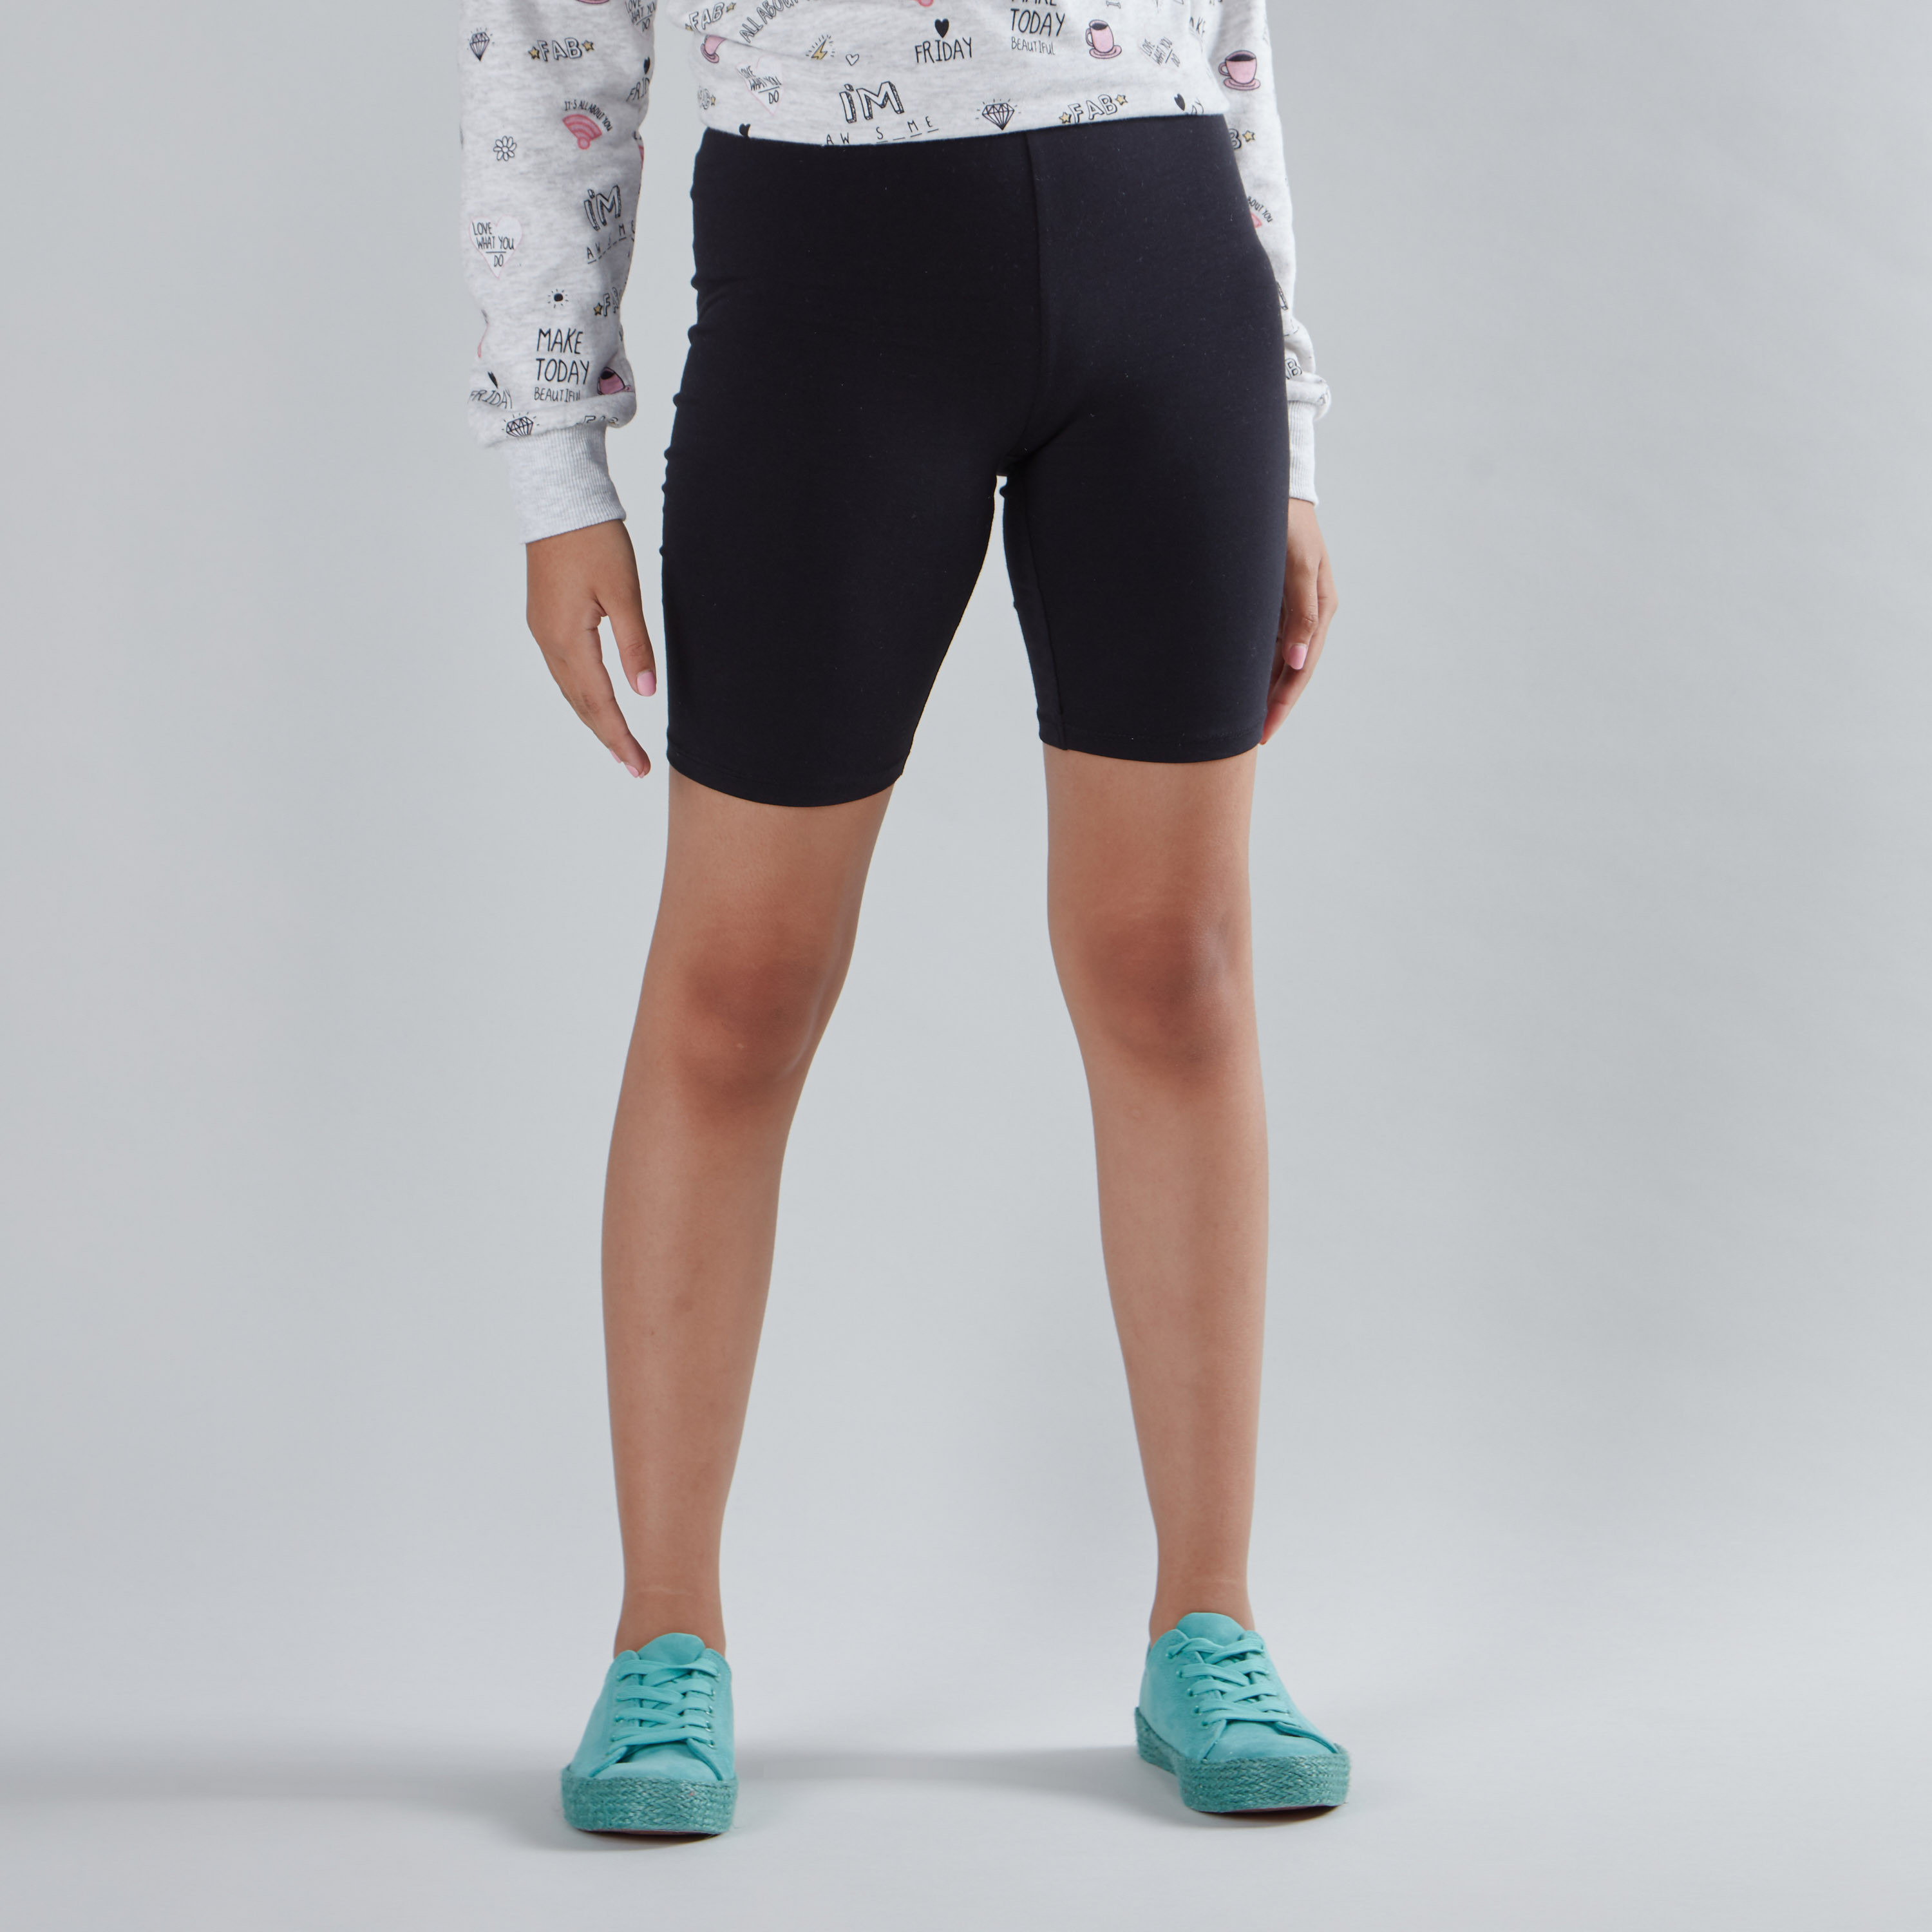 Shop Plain Cycling Shorts with Elasticised Waistband Online Max Kuwait